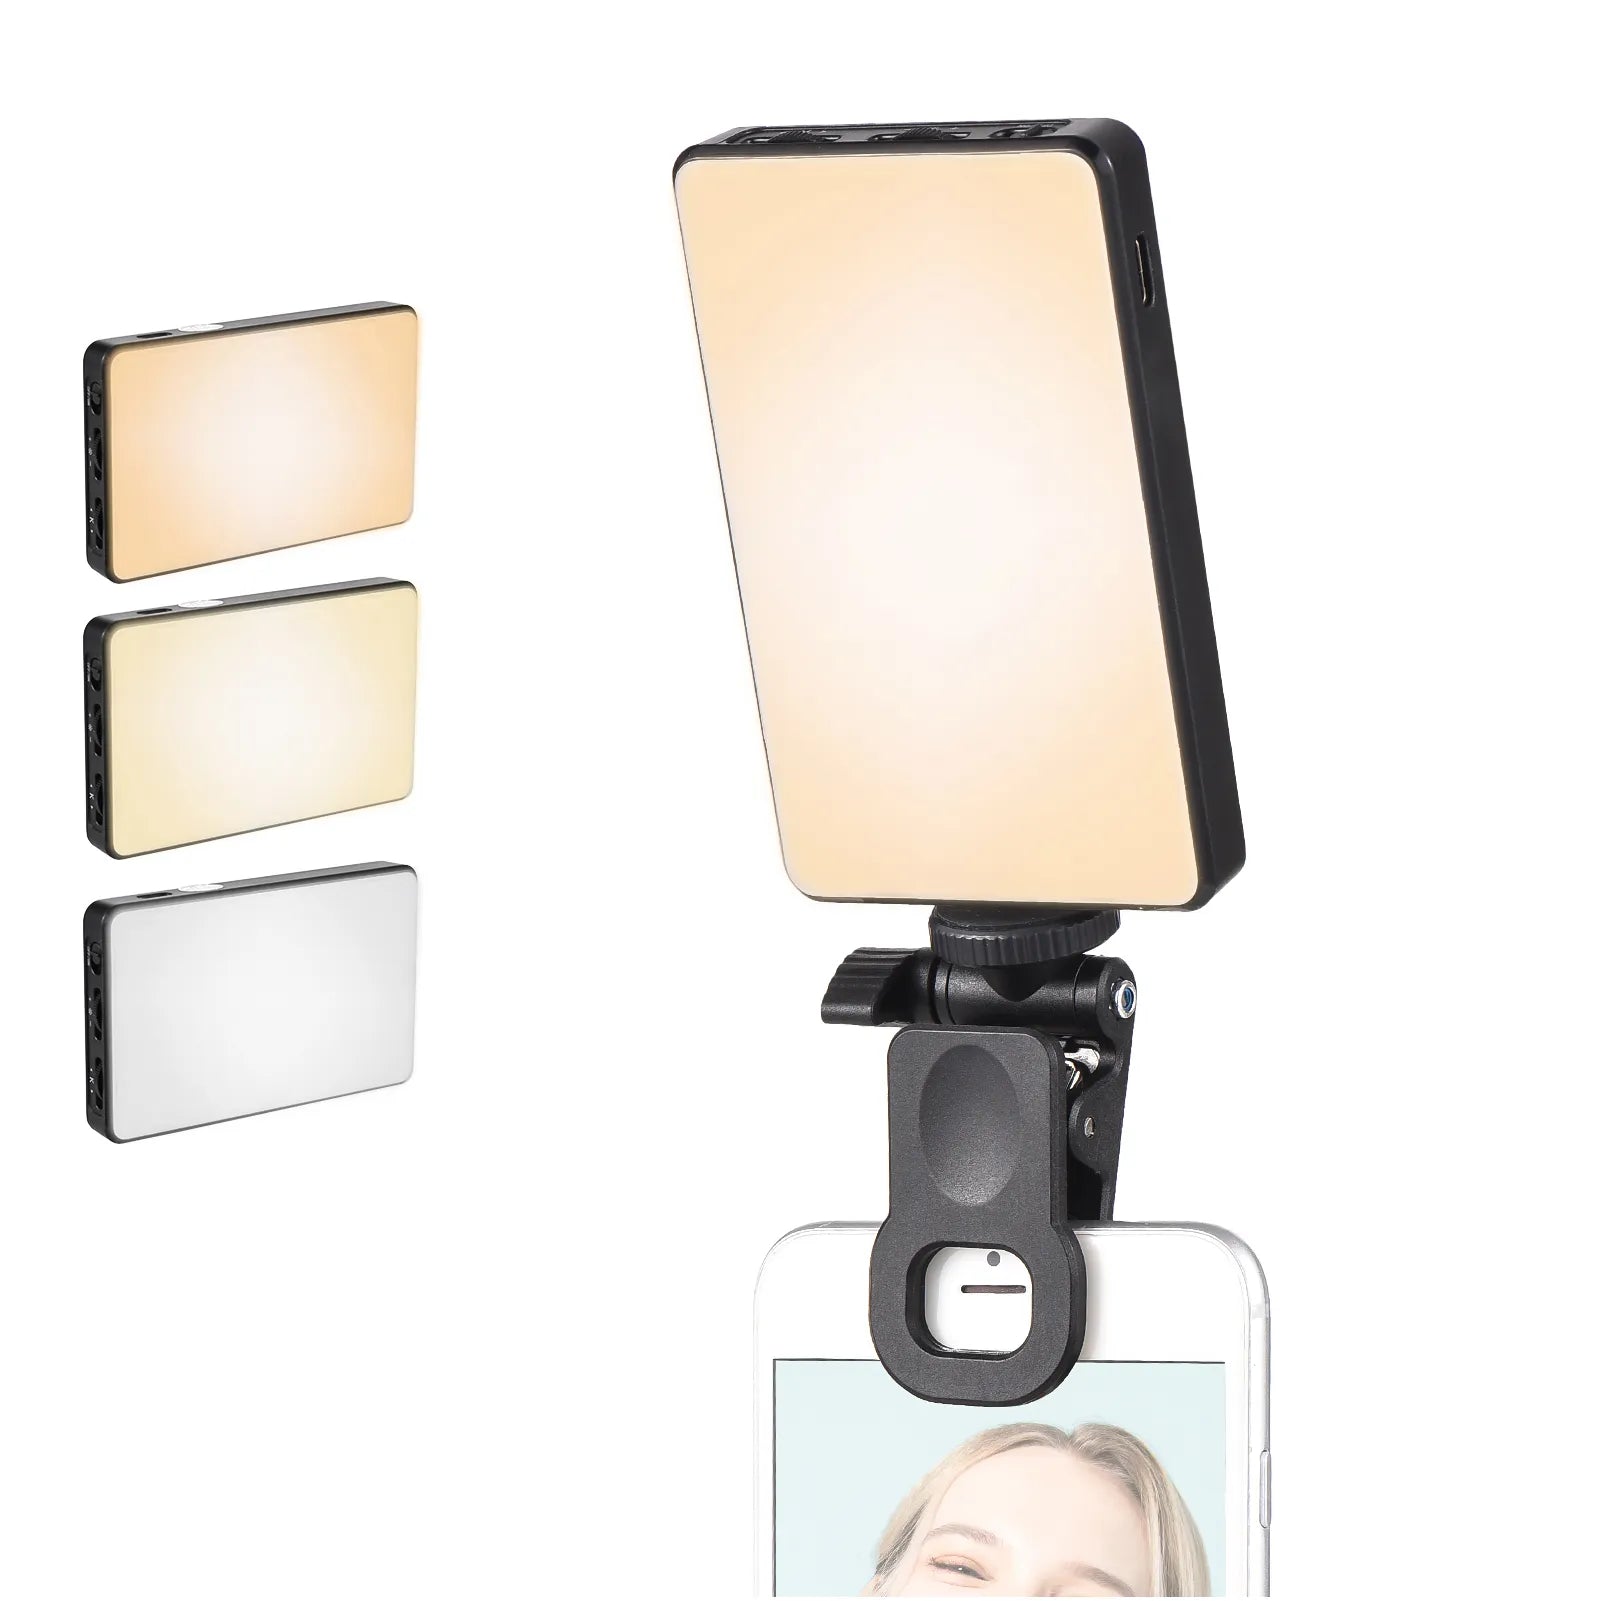 Portable Clip-on LED Selfie Light with Adjustable Brightness & Long Battery Life for iPhone Samsung Huawei Xiaomi Smartphones  ourlum.com   